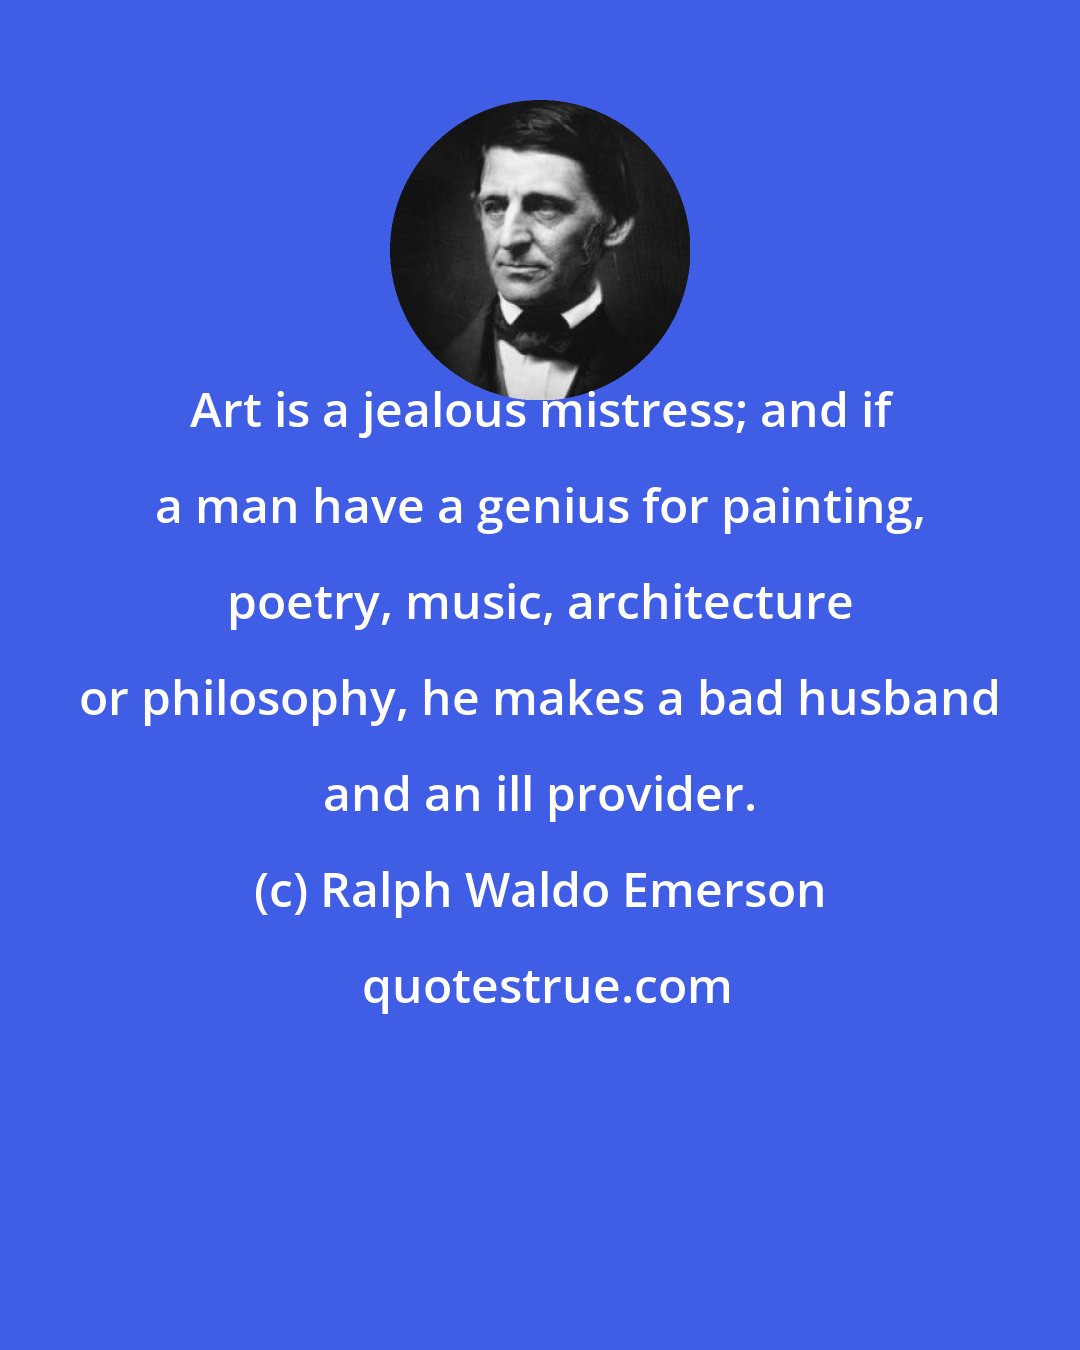 Ralph Waldo Emerson: Art is a jealous mistress; and if a man have a genius for painting, poetry, music, architecture or philosophy, he makes a bad husband and an ill provider.